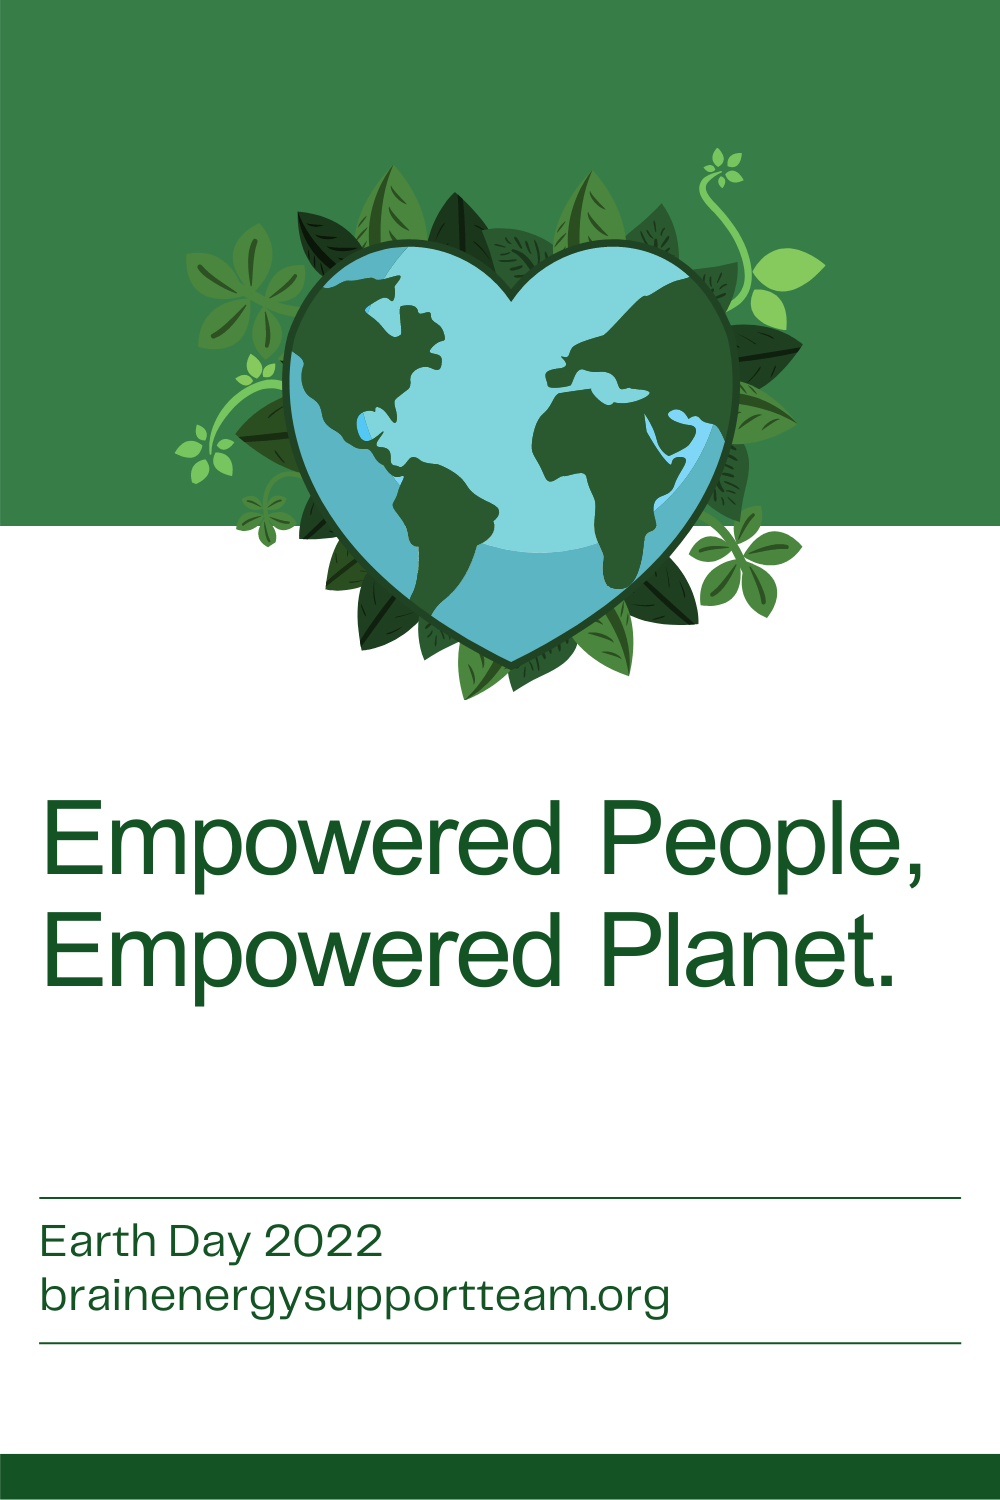 Empowered People, Empowered Planet: Earth Day 2022